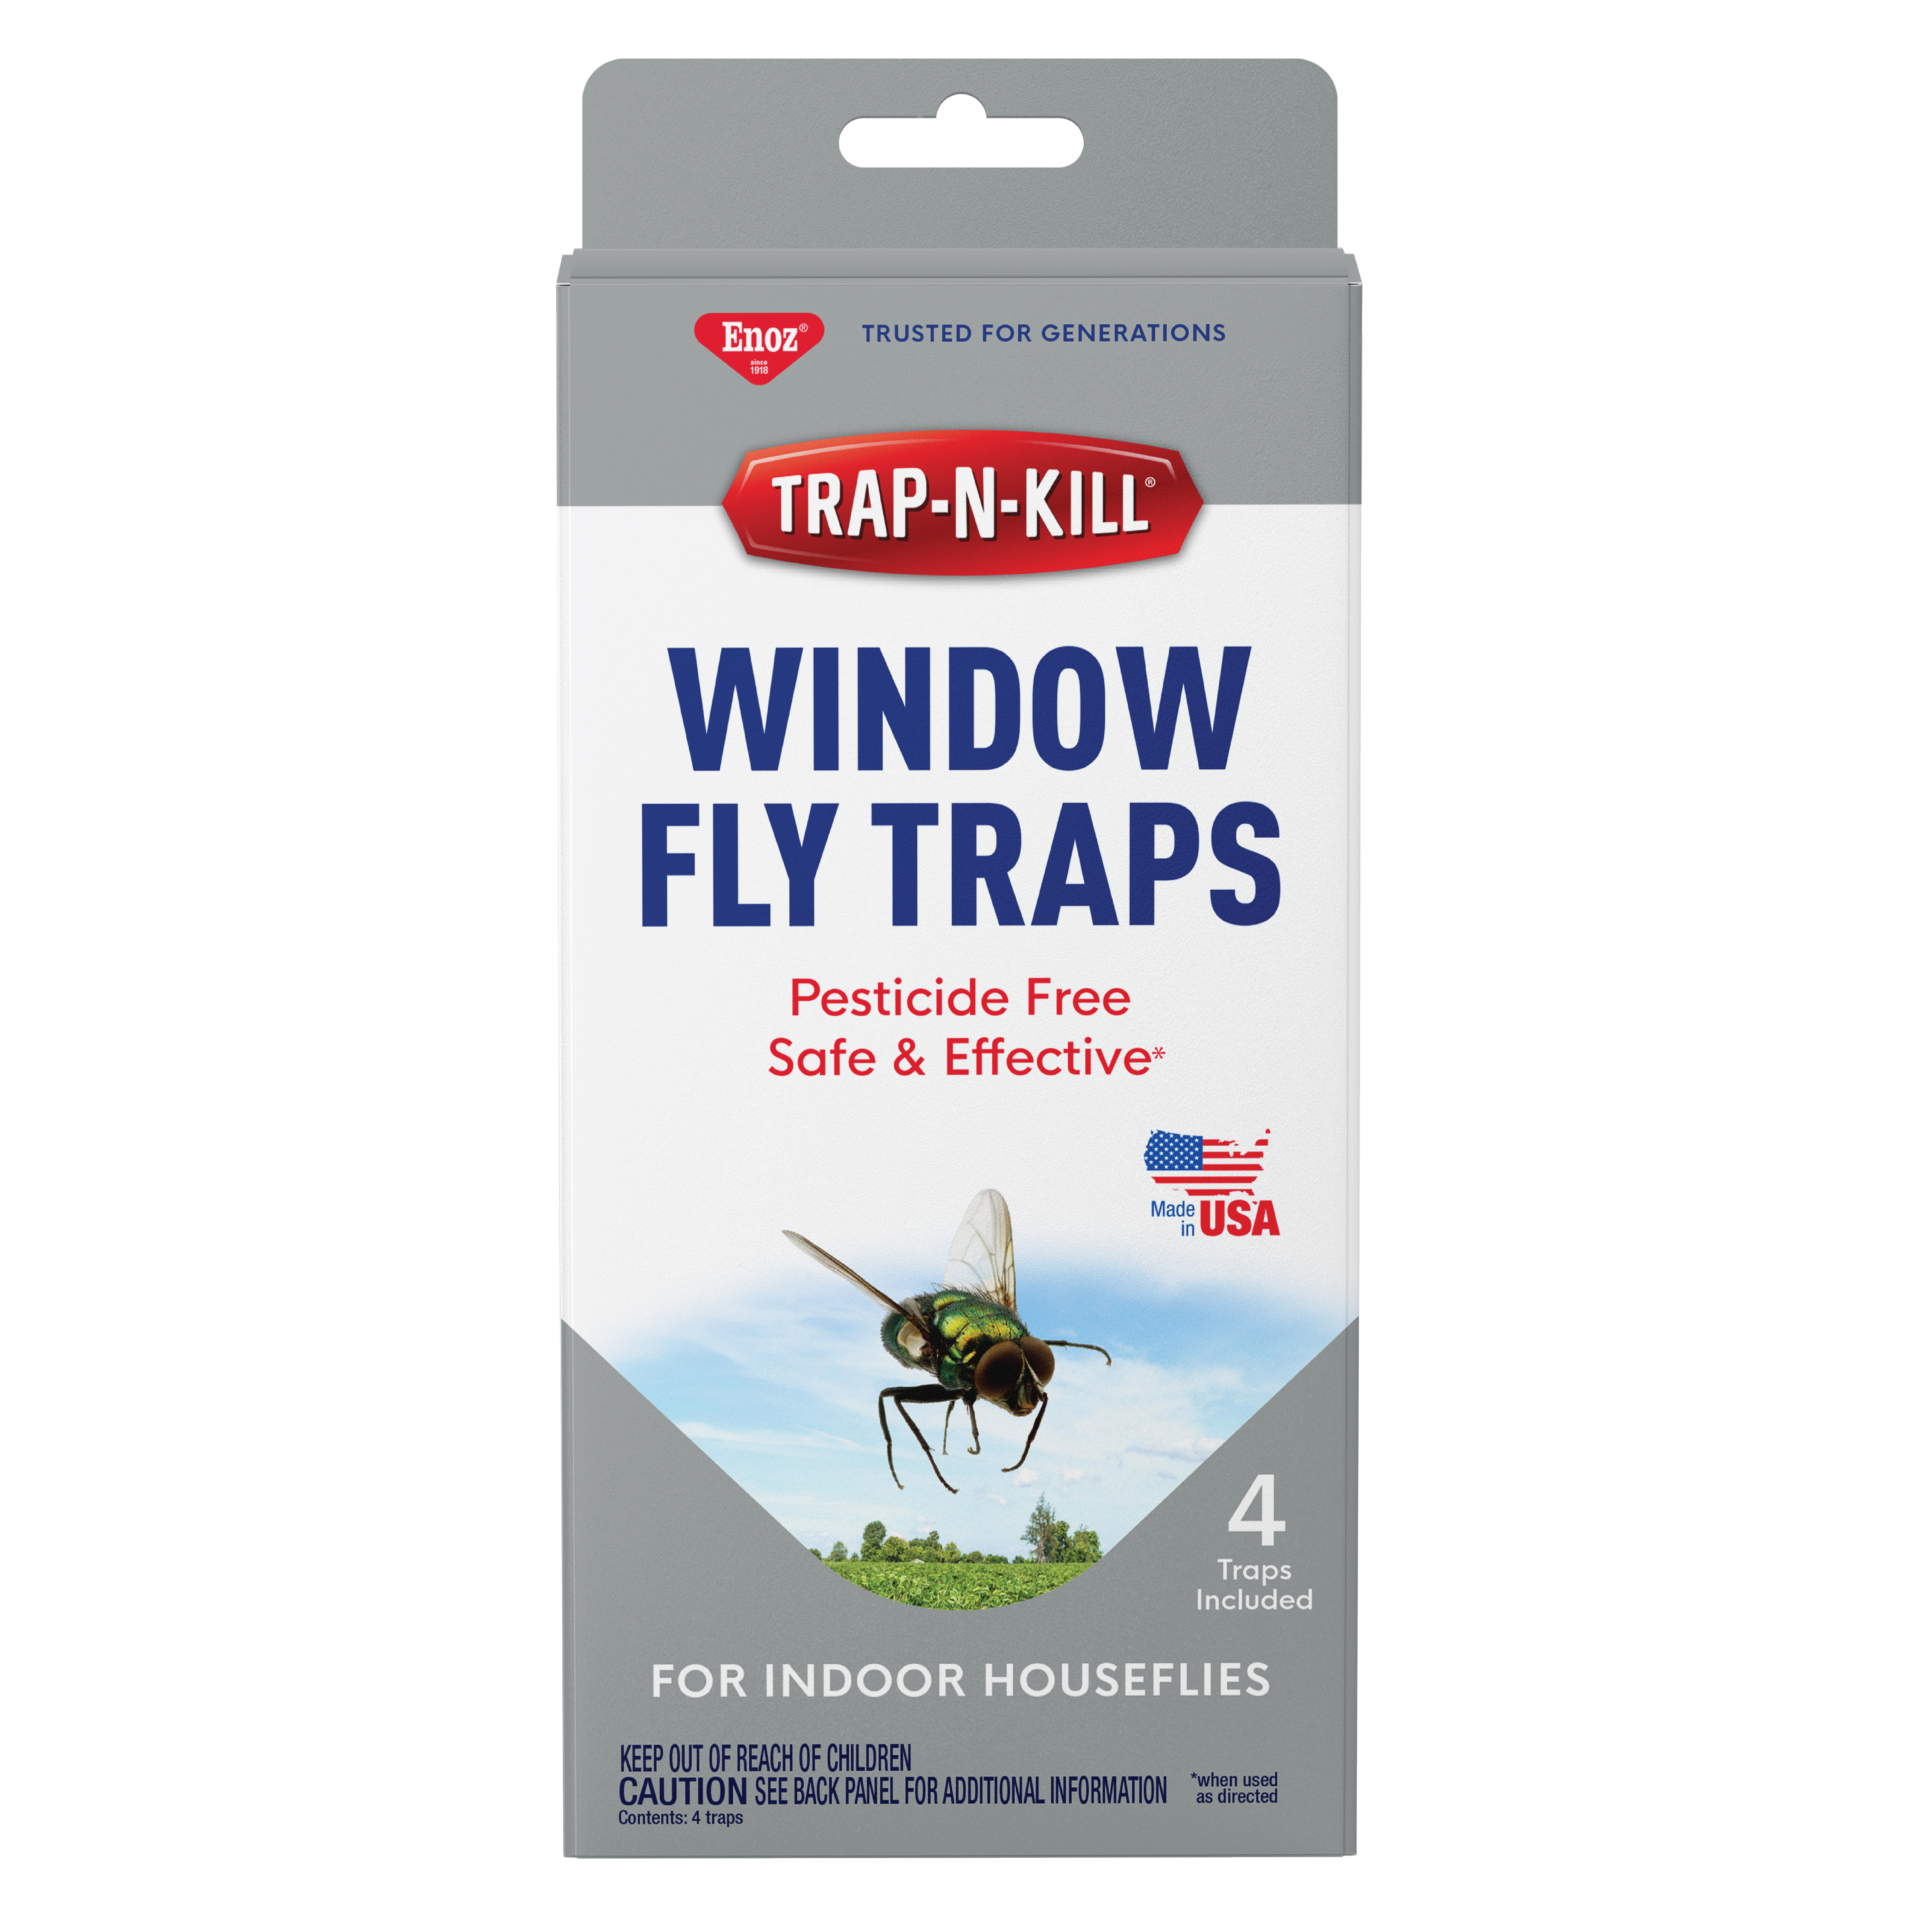 Enoz Trap-N-Kill Window Fly Traps for Indoor Houseflies, Nontoxic, Made in  USA, 4 Count